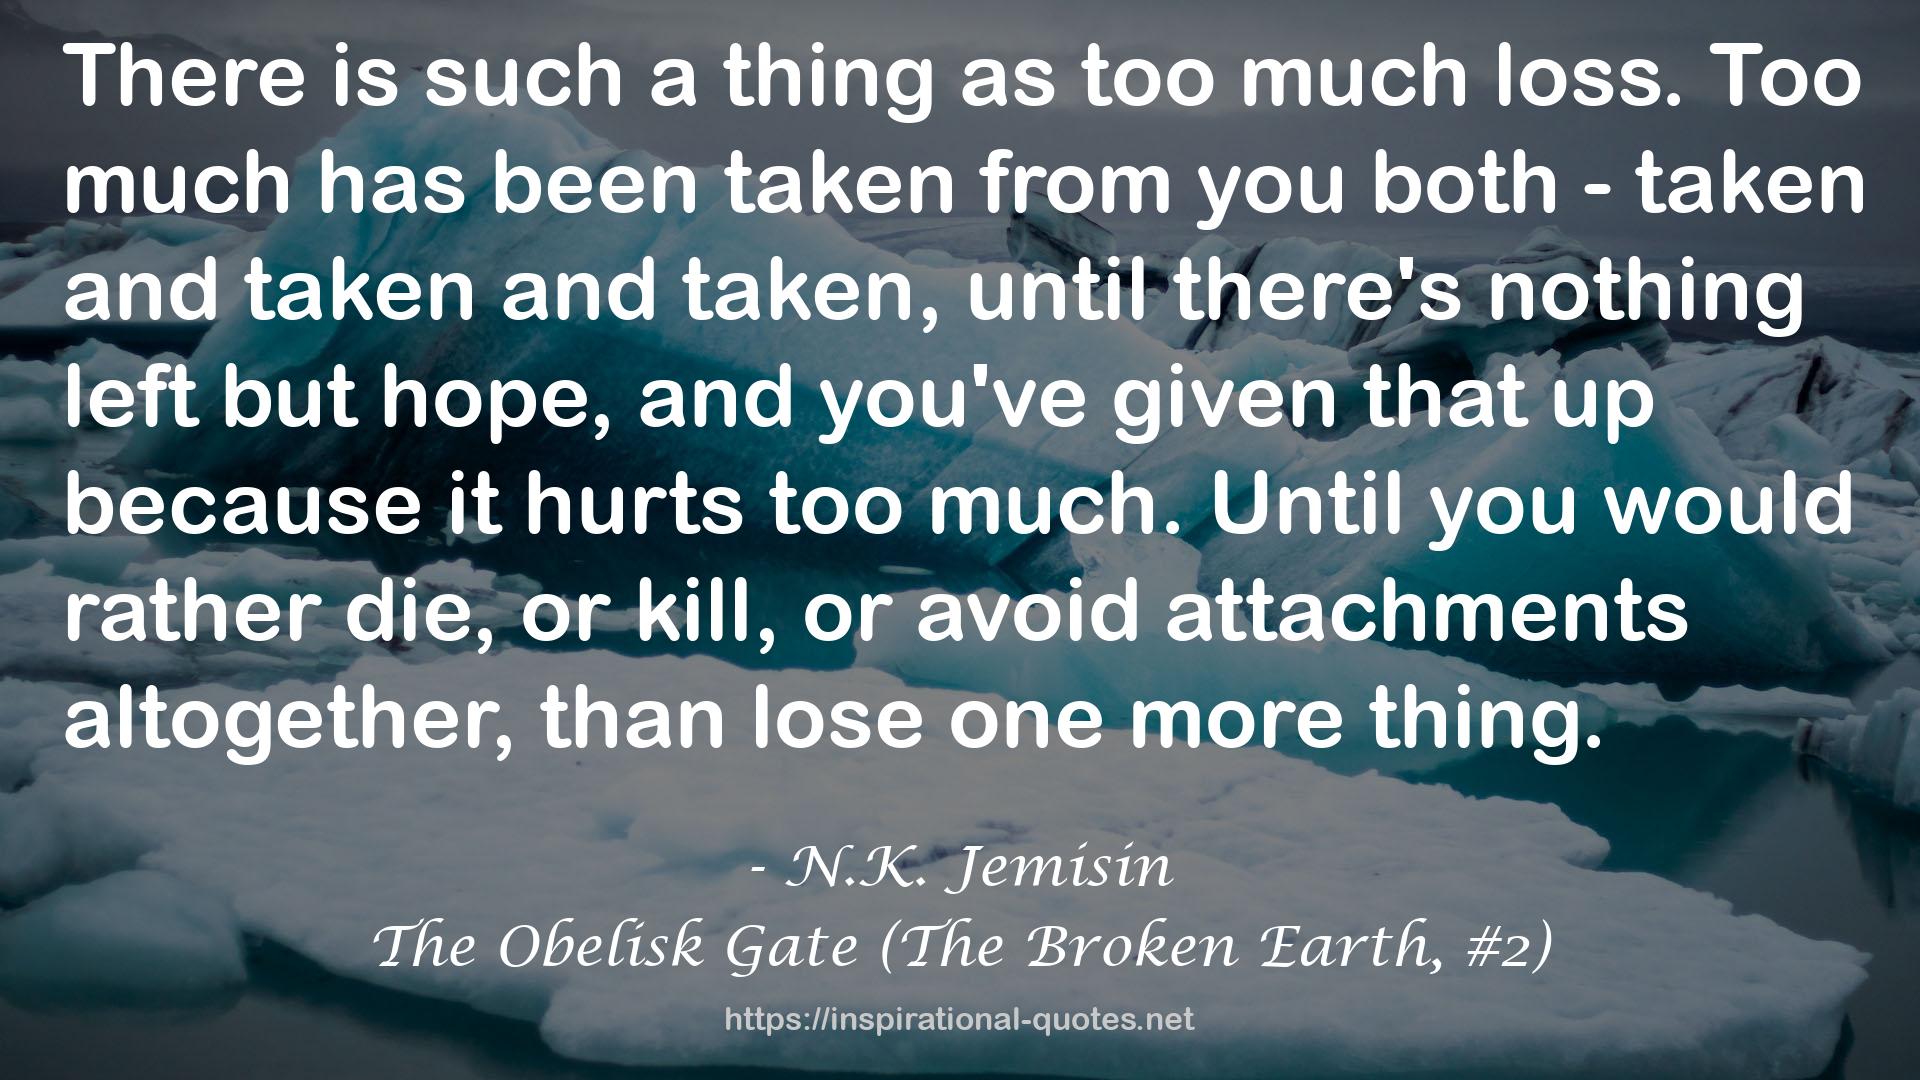 The Obelisk Gate (The Broken Earth, #2) QUOTES